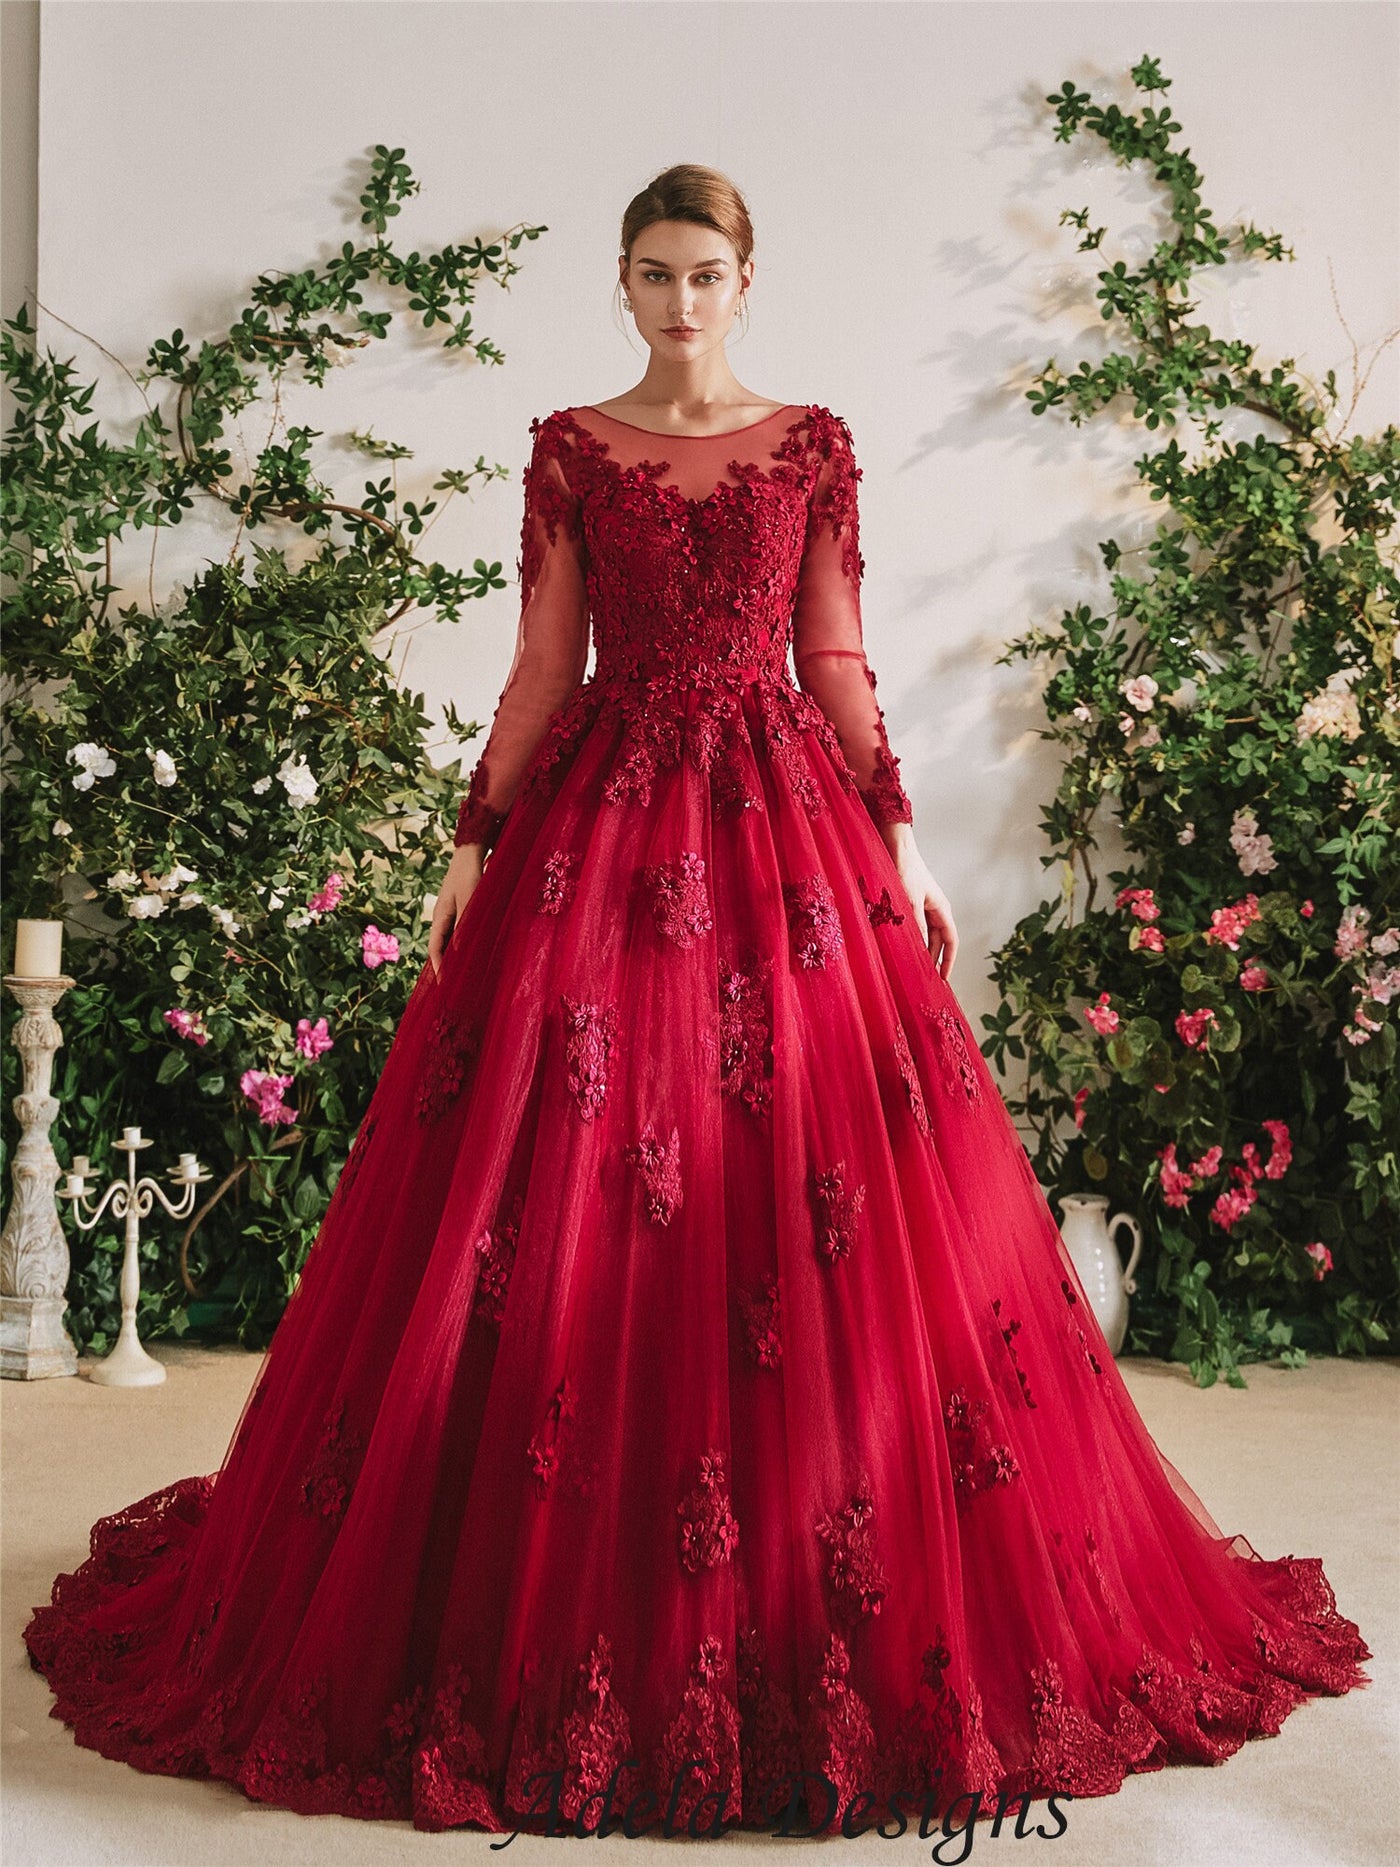 Unconventional Dark Red Bridal Ball Gown Colorful Wedding Dress Full  Classic Long Sleeve 3d Flowers Illusion Neckline Full Aline Ball Gown - Etsy